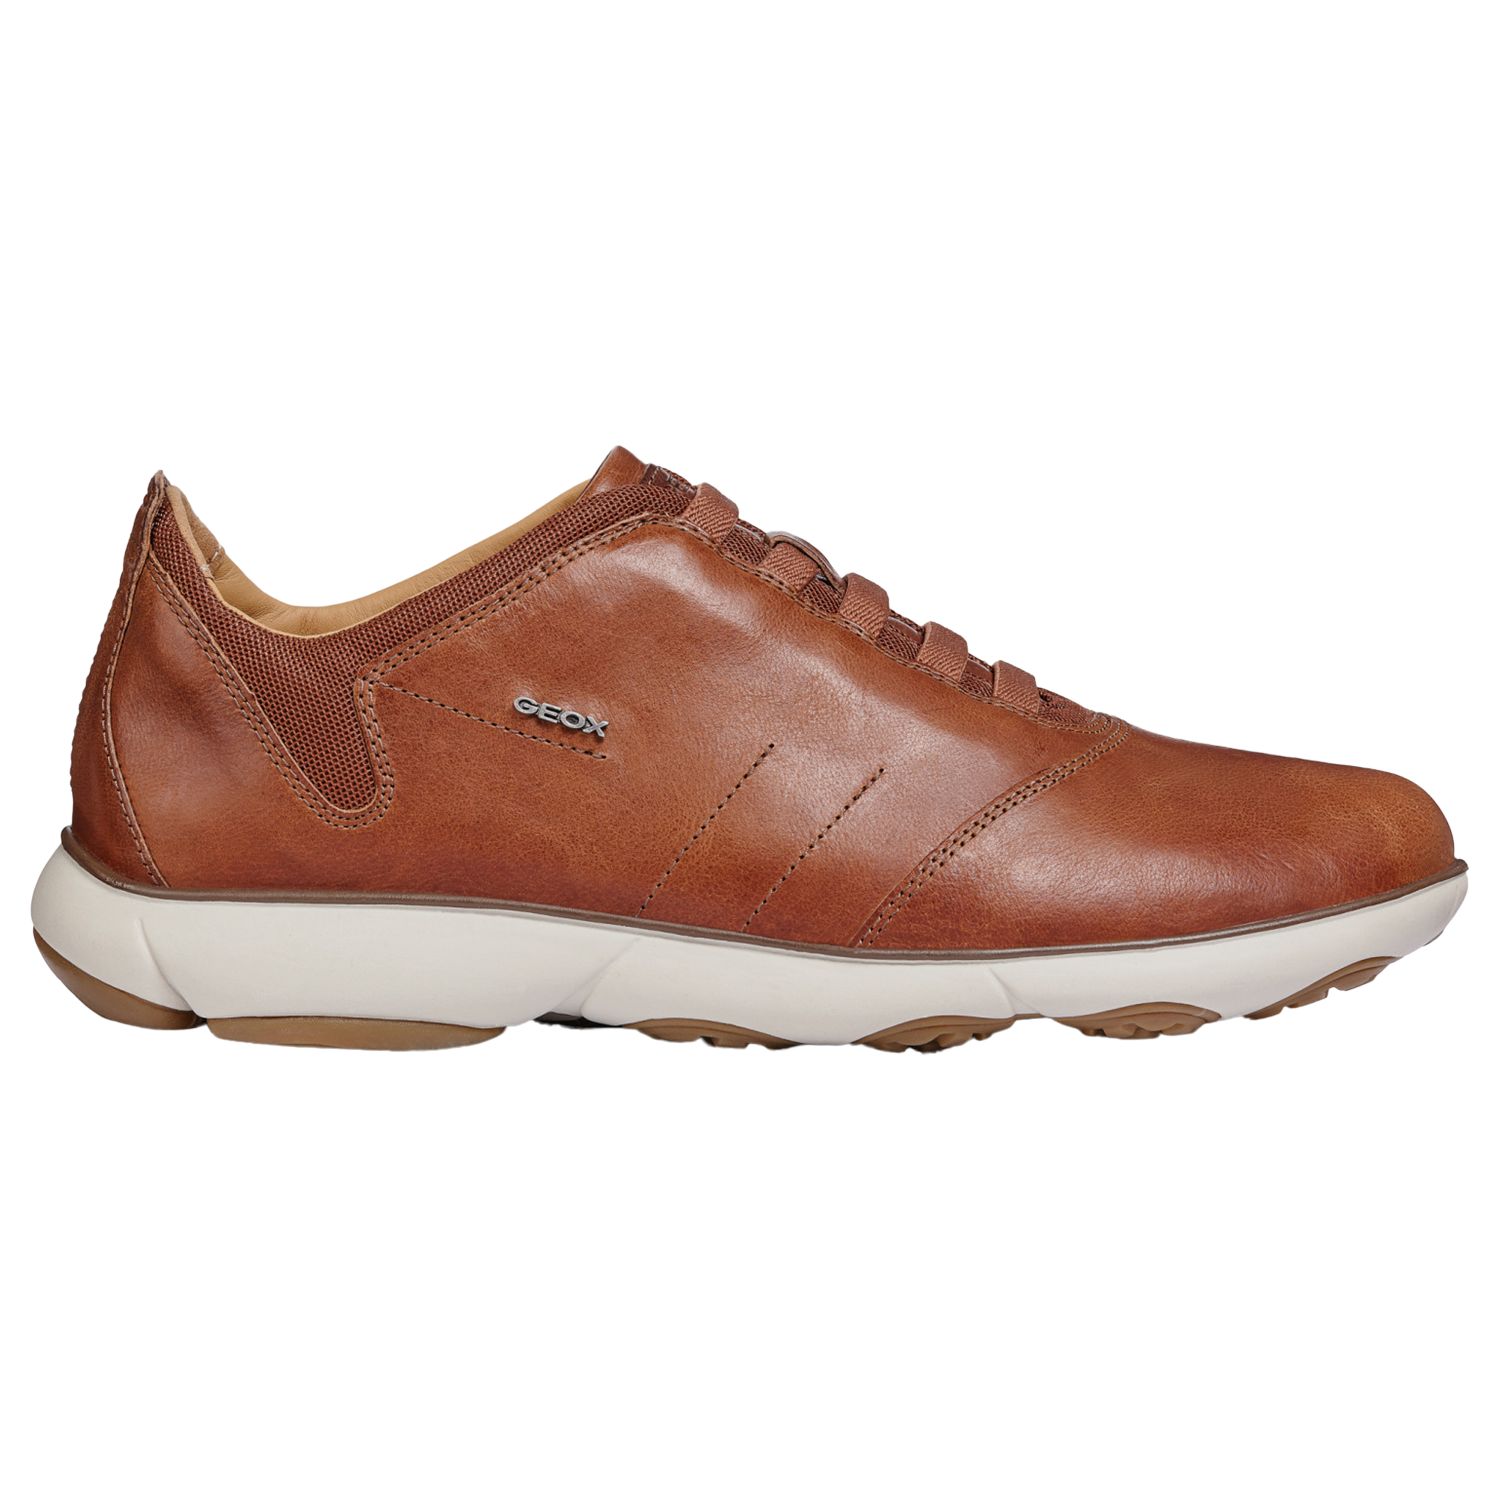 Geox Nebula Breathable Trainers, Brown